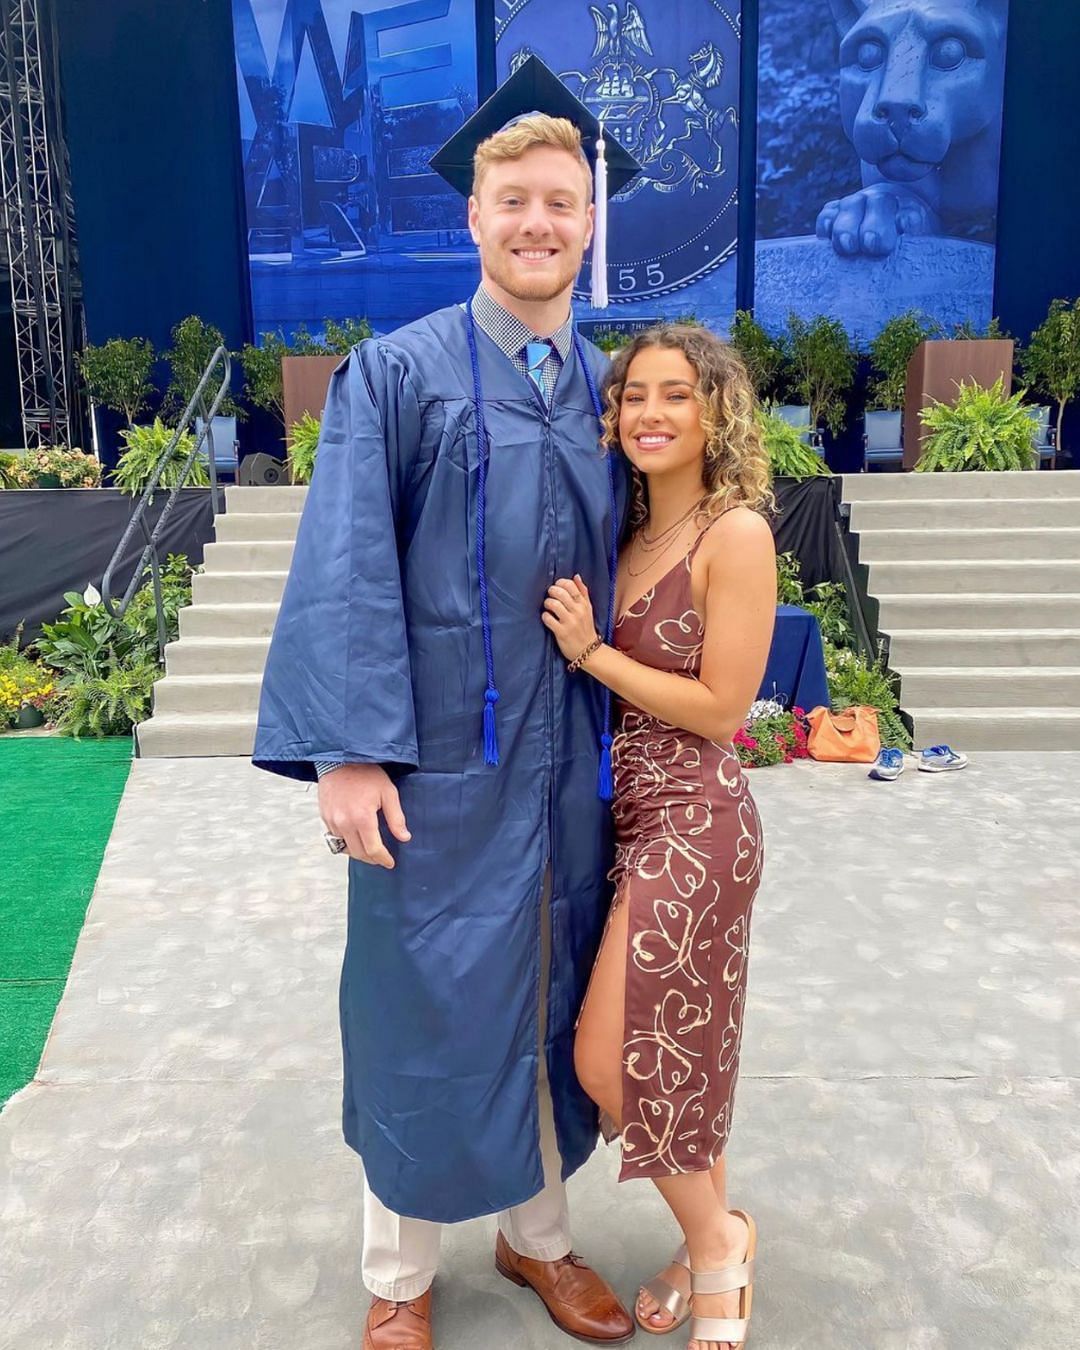 Duddy with Levis at his graduation from Penn State. Credit: @giaduddy (IG)